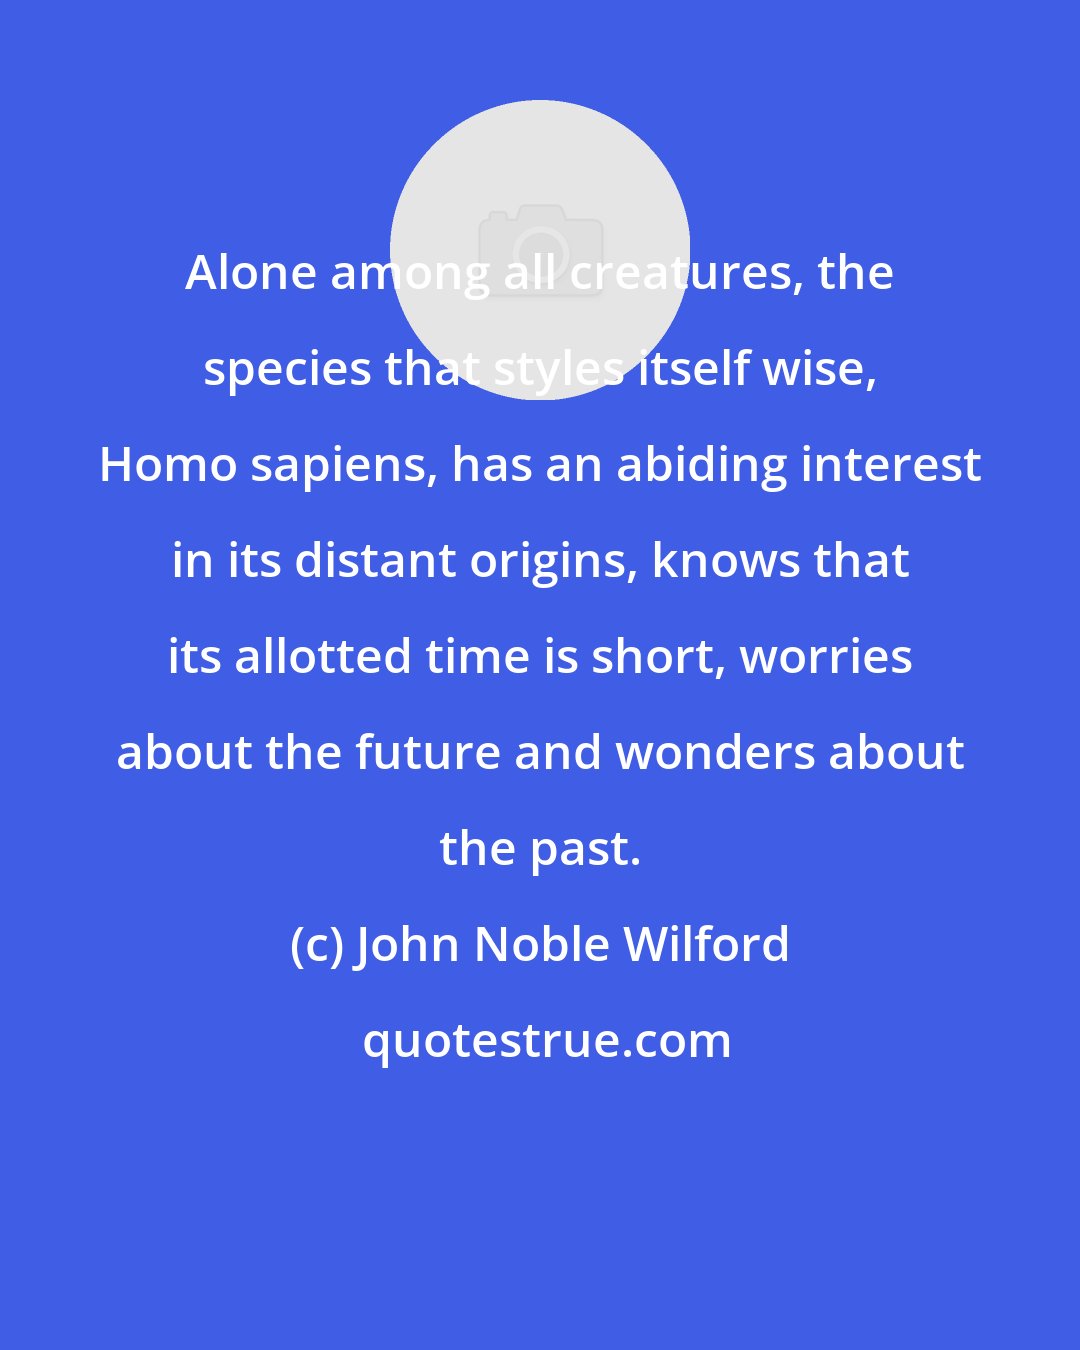 John Noble Wilford: Alone among all creatures, the species that styles itself wise, Homo sapiens, has an abiding interest in its distant origins, knows that its allotted time is short, worries about the future and wonders about the past.